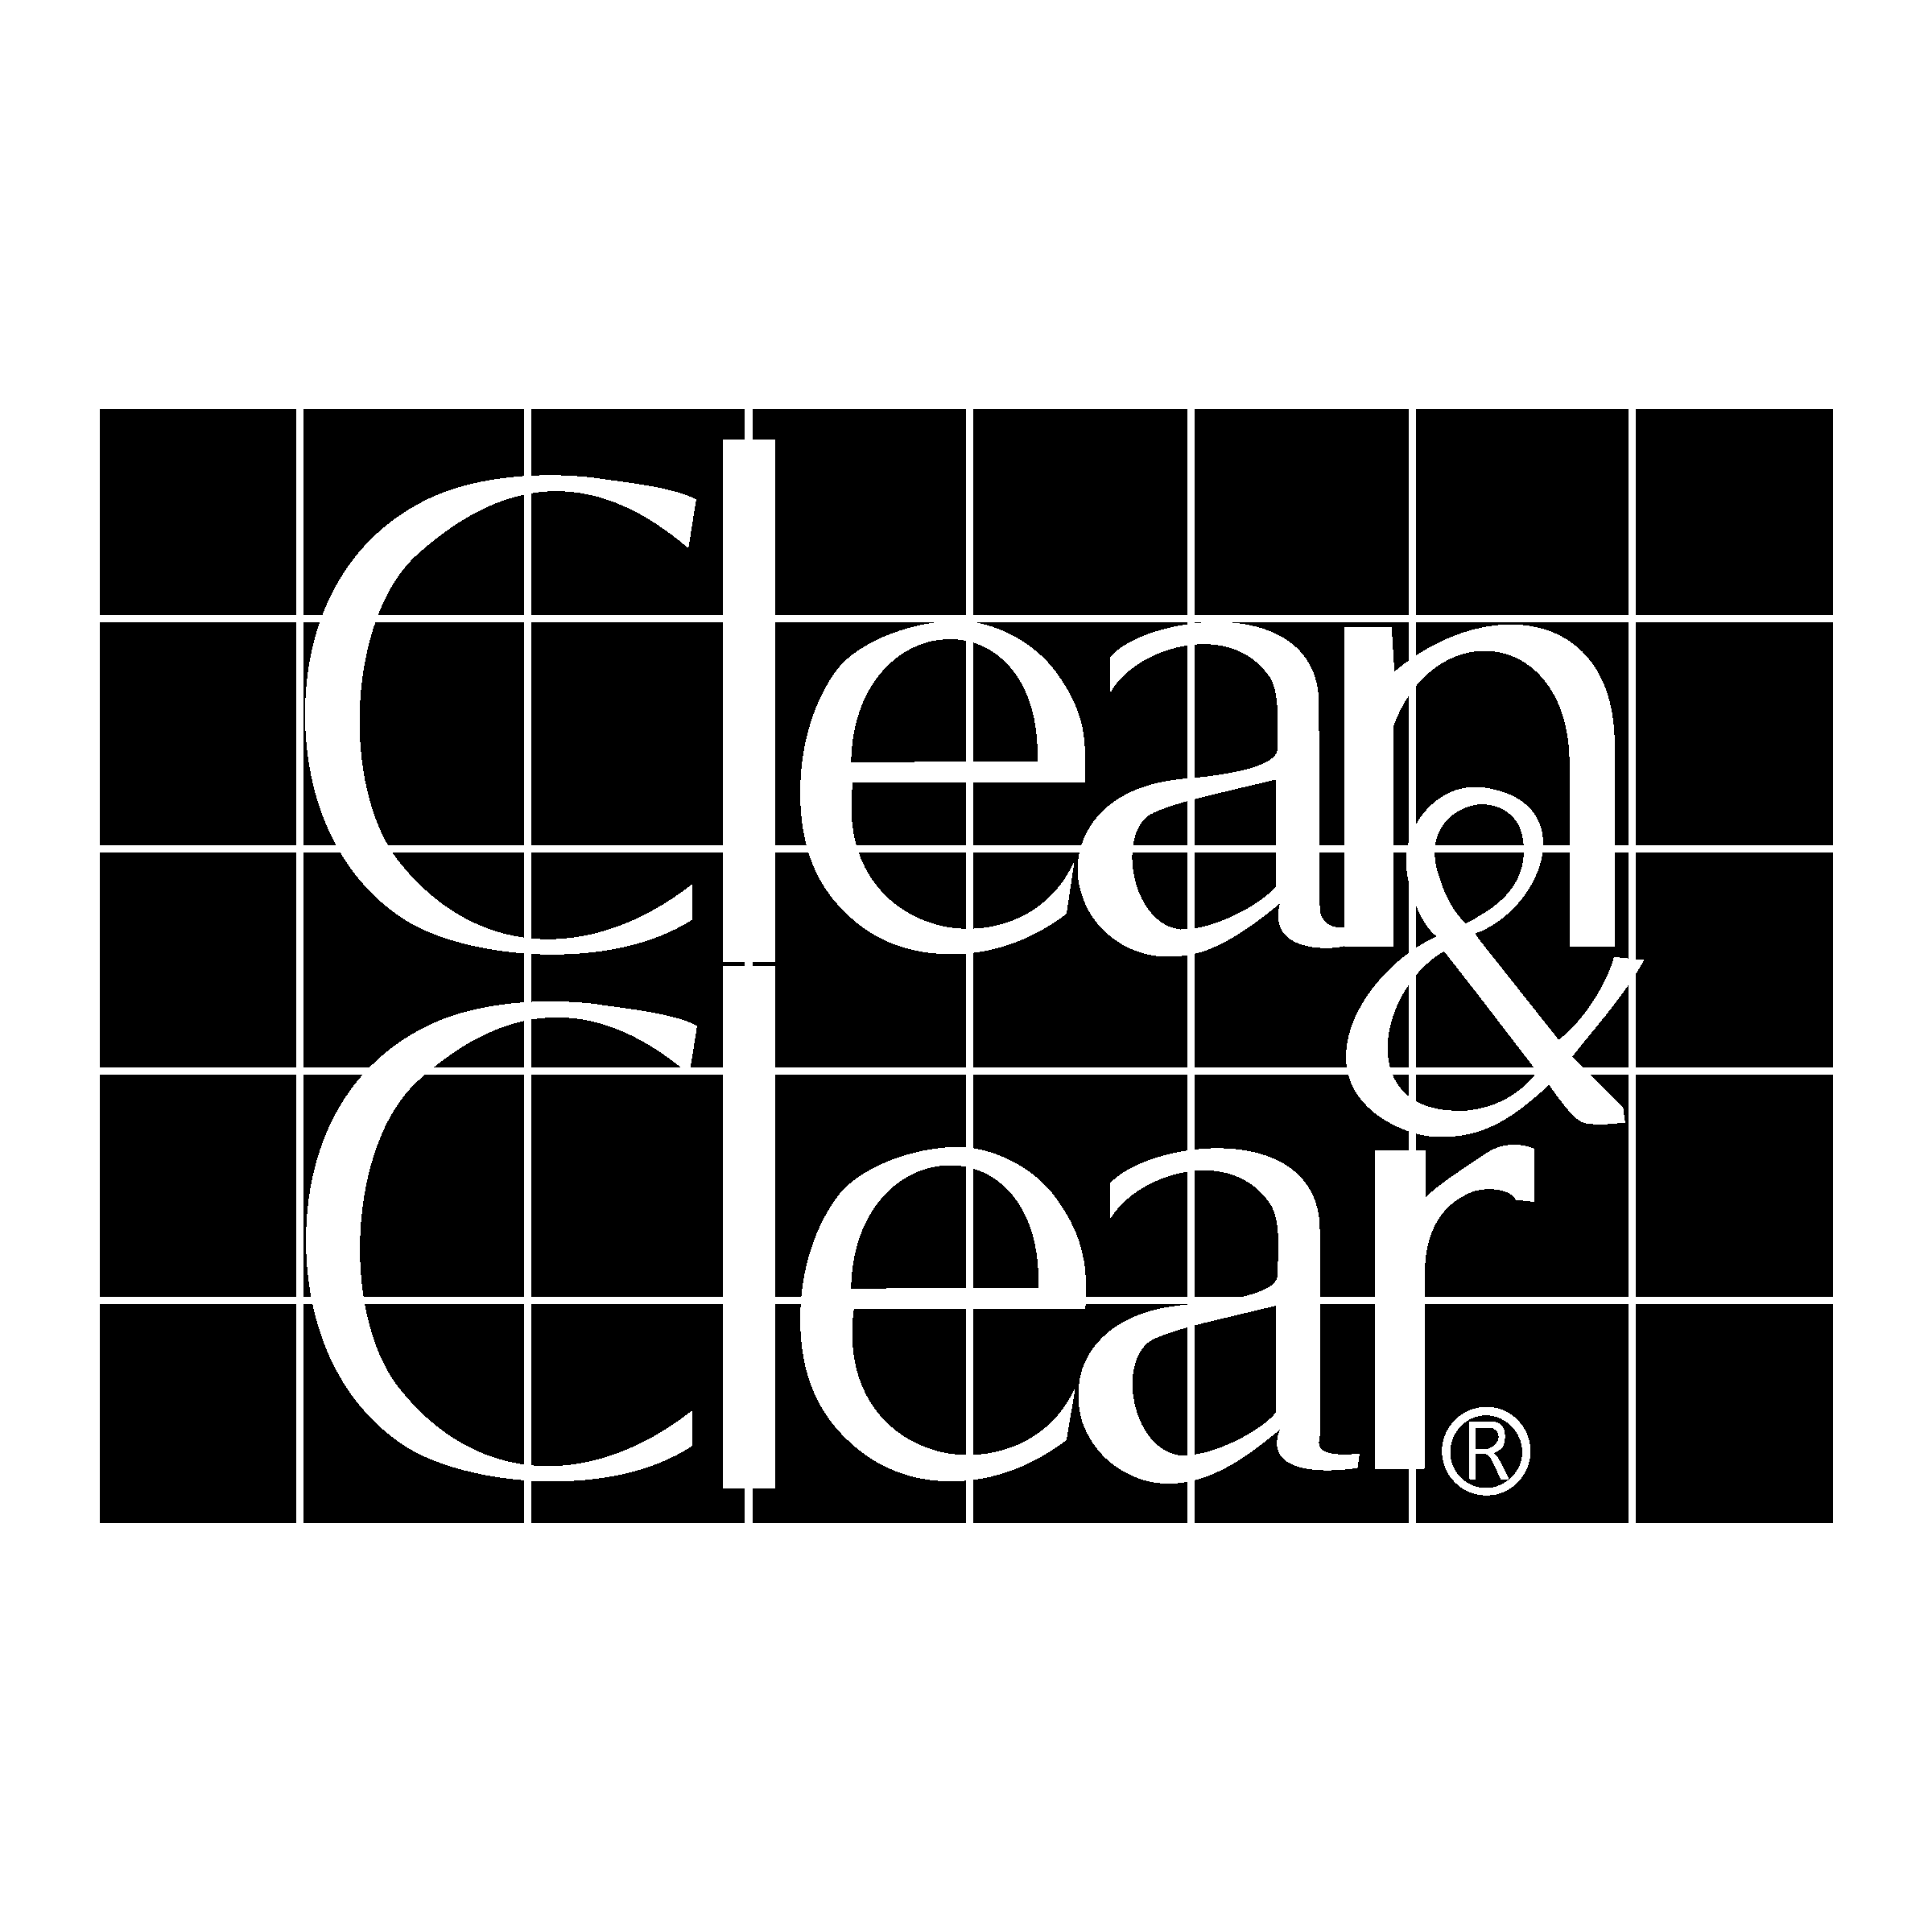 Clean and Clear Logo - Clean & Clear Logo PNG Transparent & SVG Vector - Freebie Supply